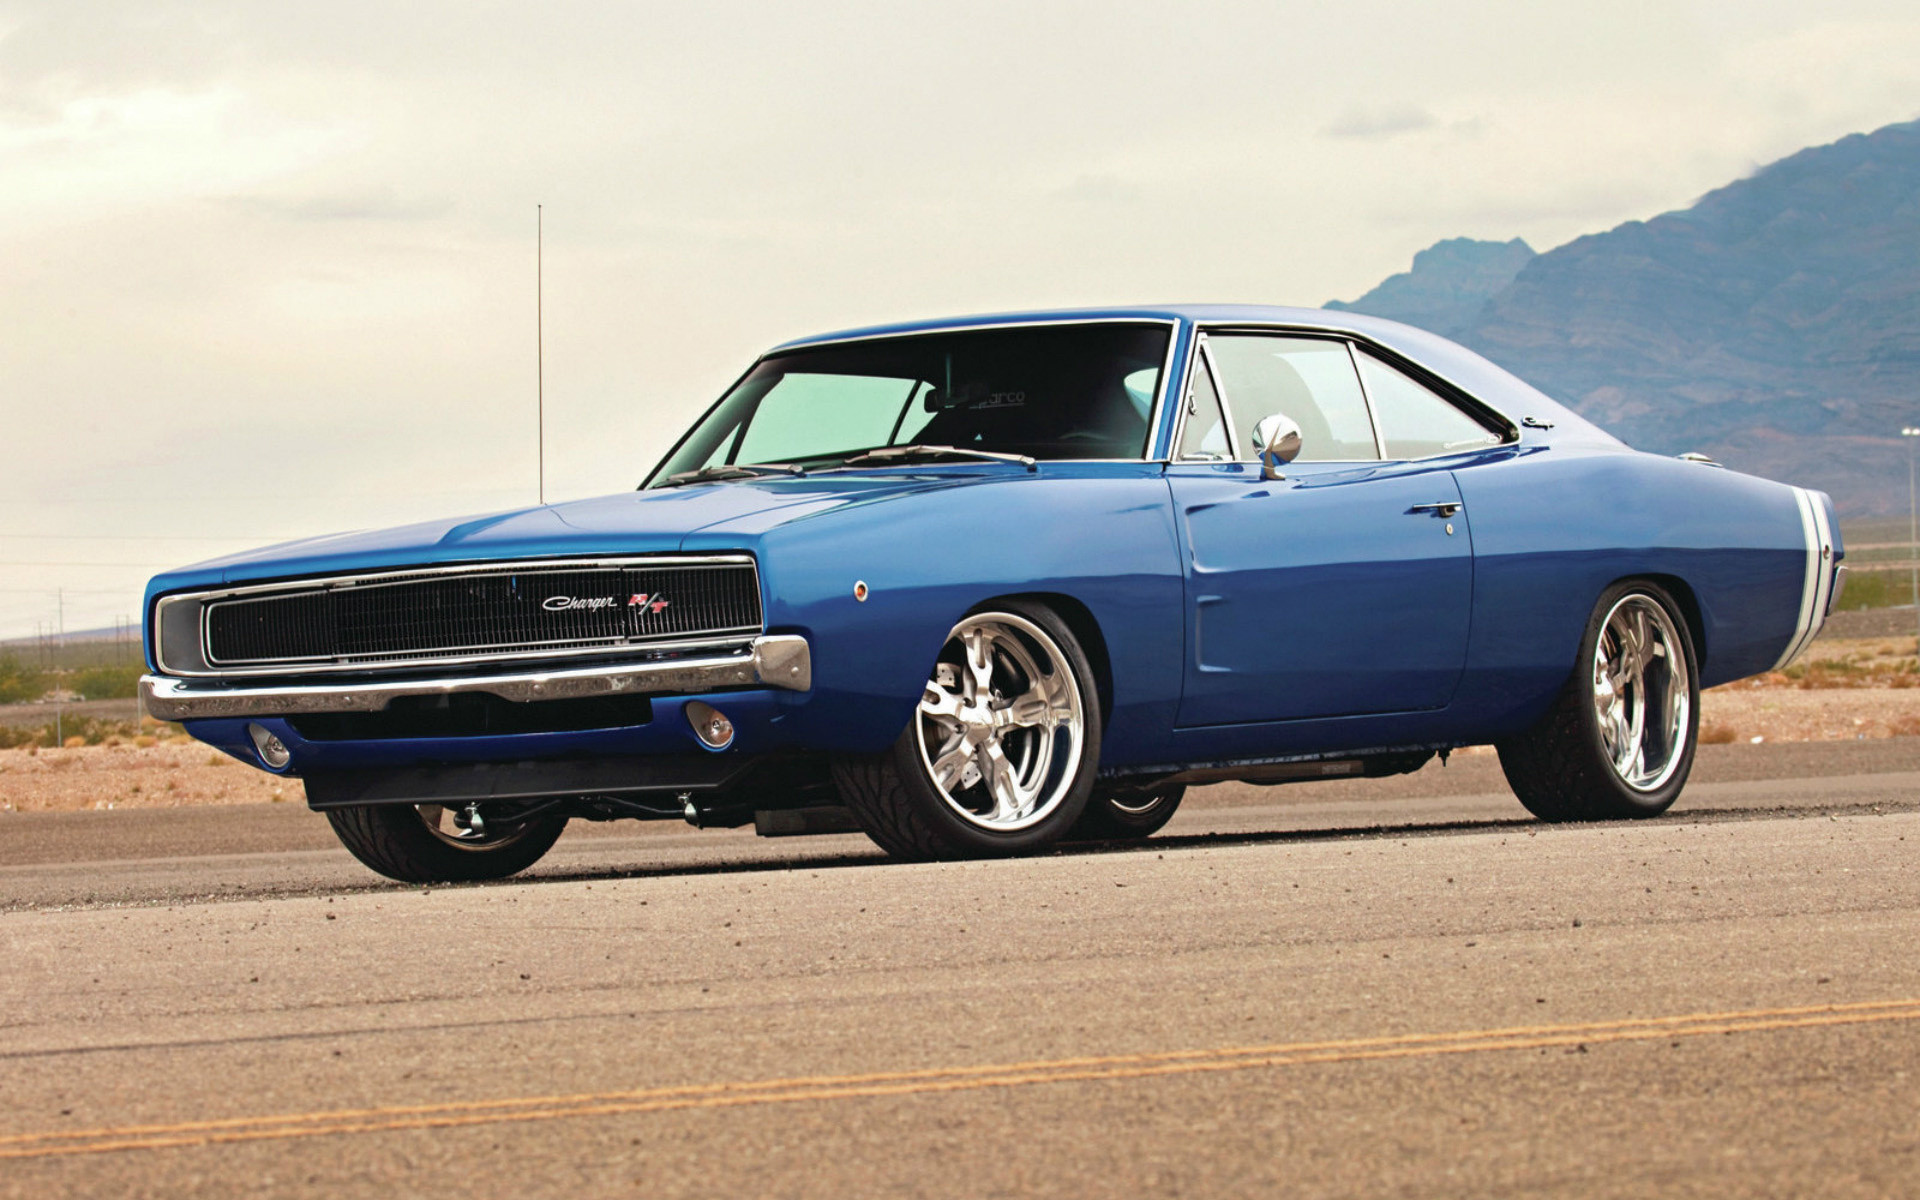 1920x1200 Dodge Charger Car Wallpapers For Ipad - http://hdcarwallfx.com/dodge